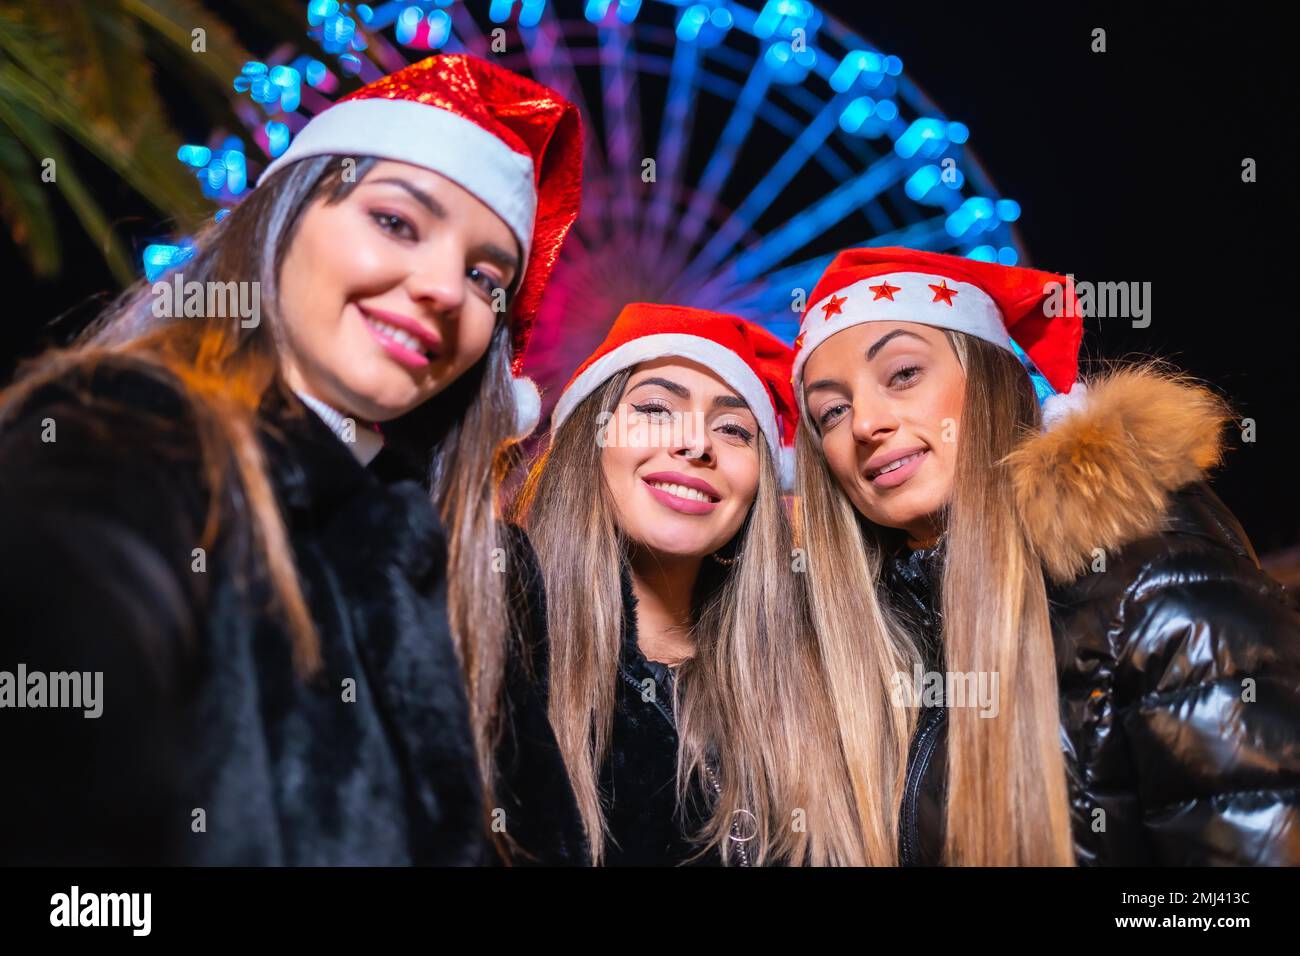 Christmas in the city at night, decoration in winter. Friends on an illuminated Ferris wheel taking a selfie Stock Photo